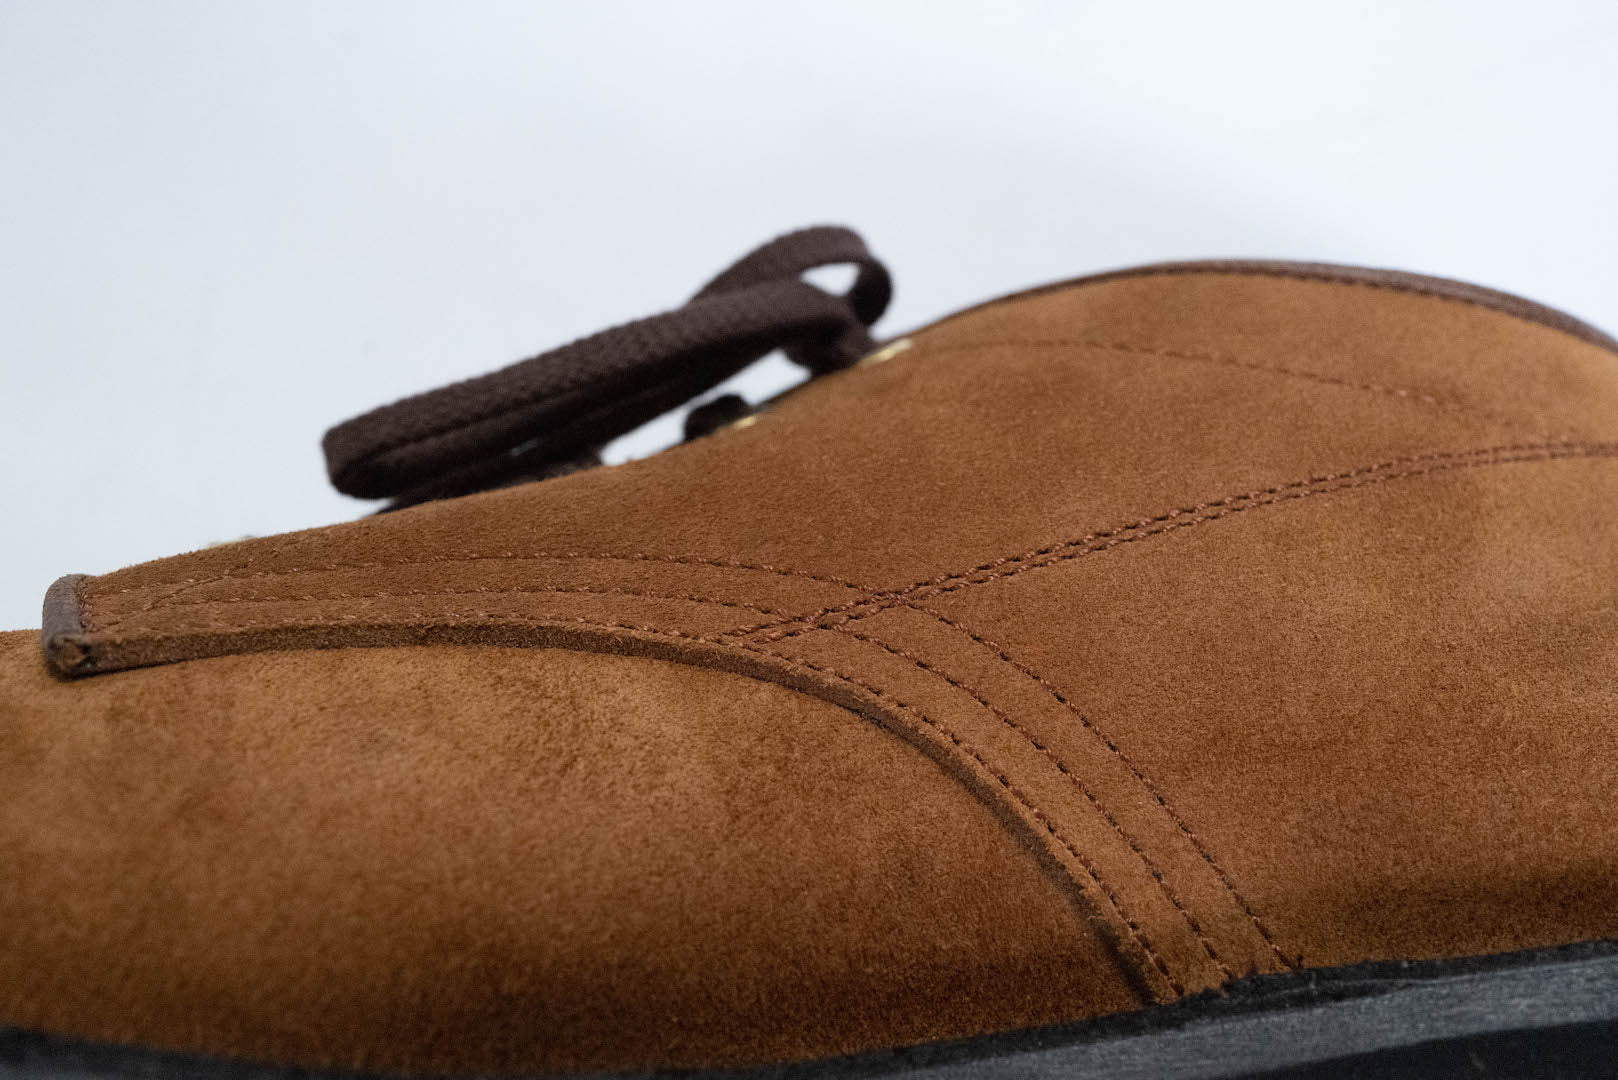 The Flat Head 'Kudu' Suede Oxford Shoes (Brown)